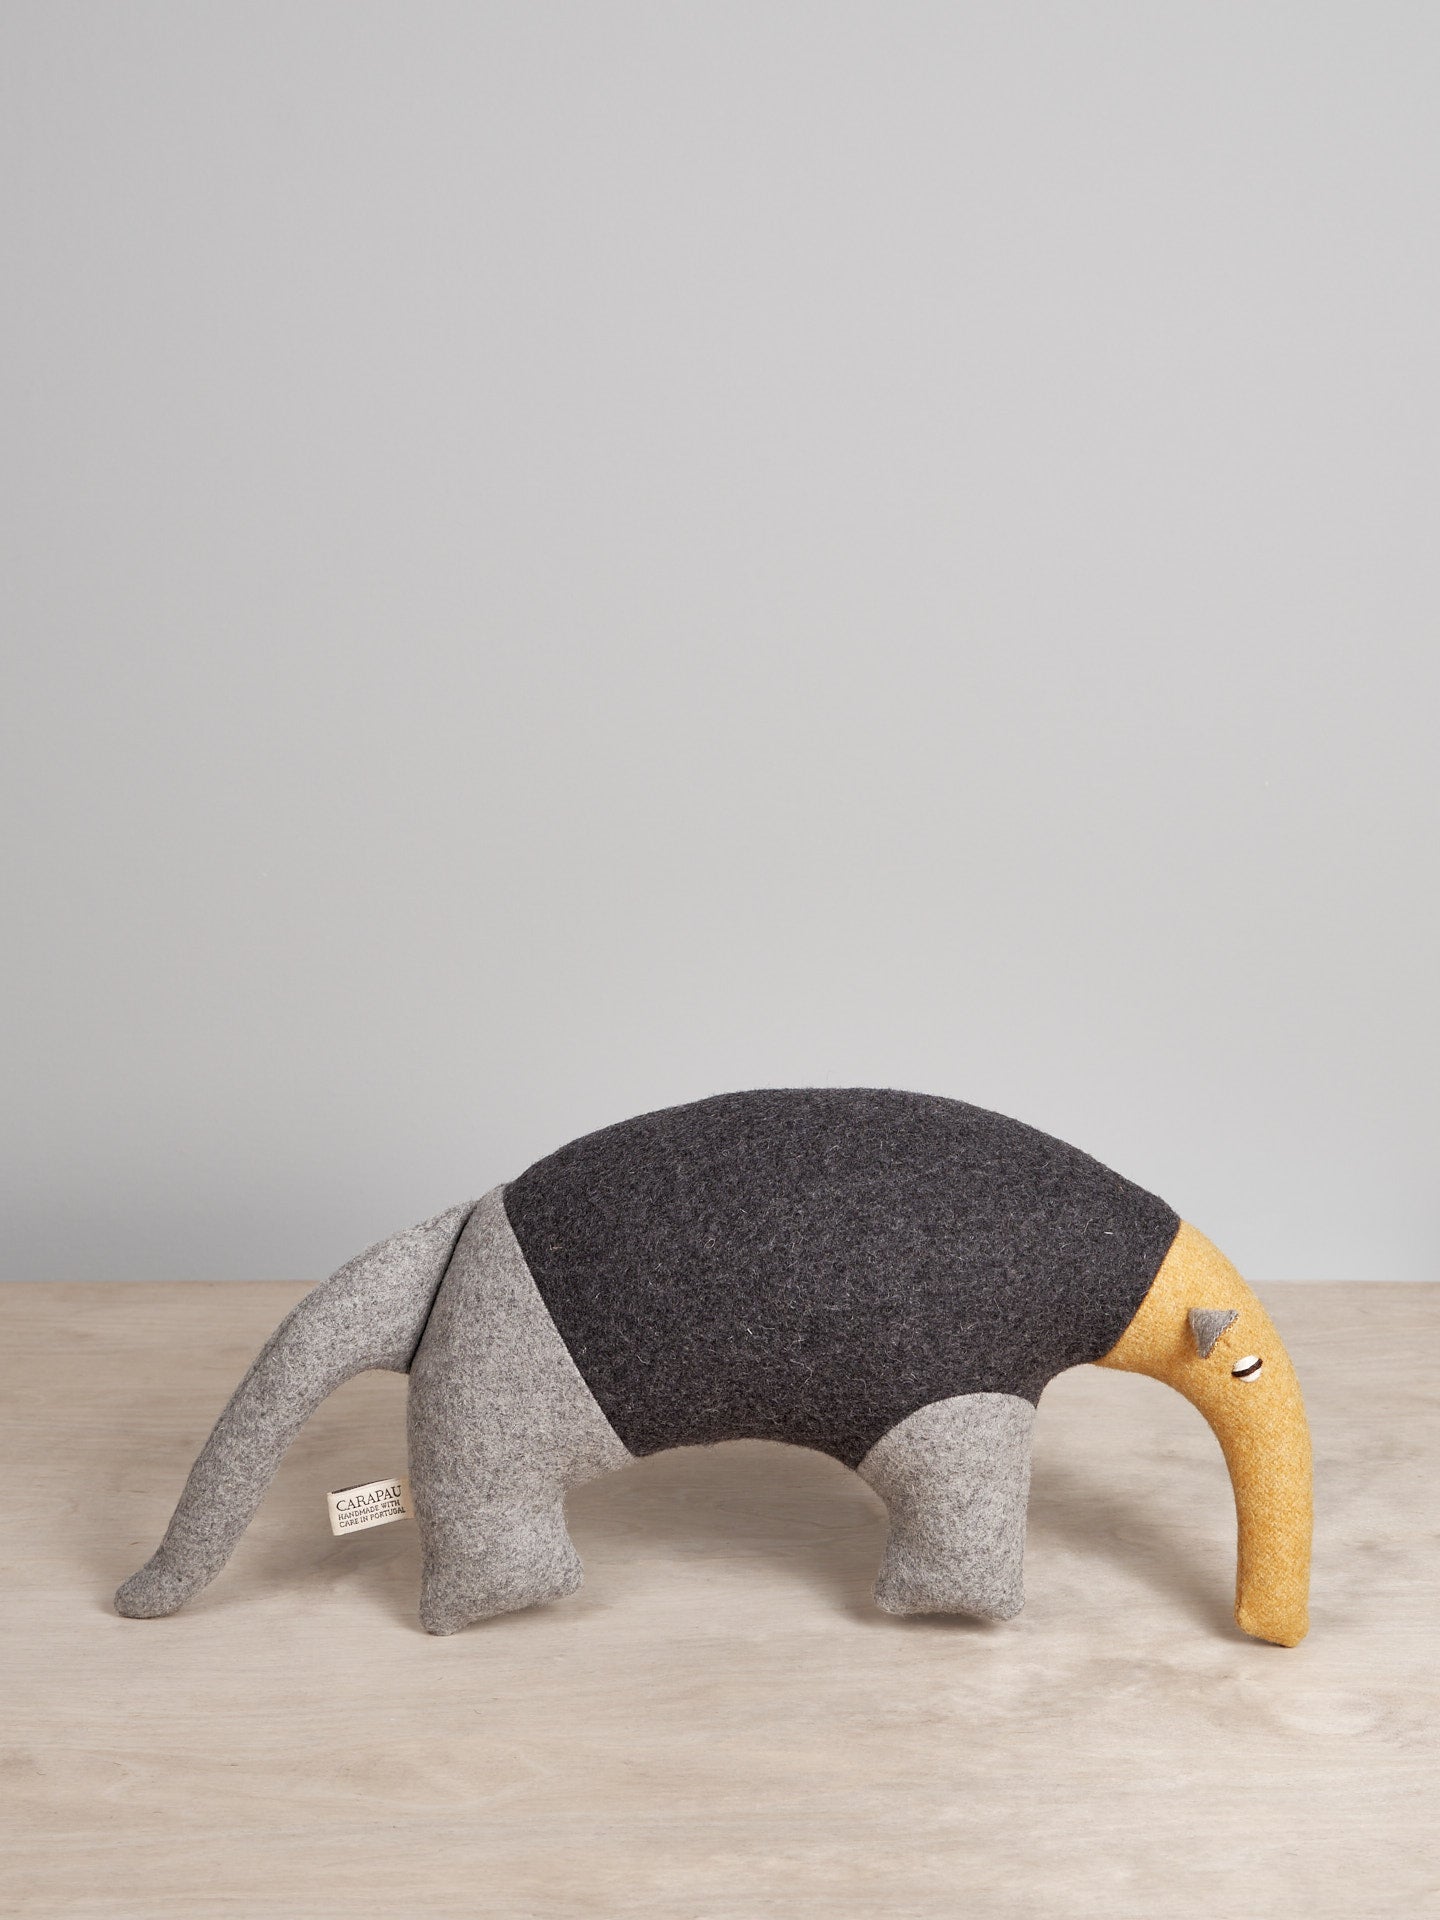 A grey and yellow Oscar, the Northern Tamandua stuffed animal on a wooden table by Carapau.